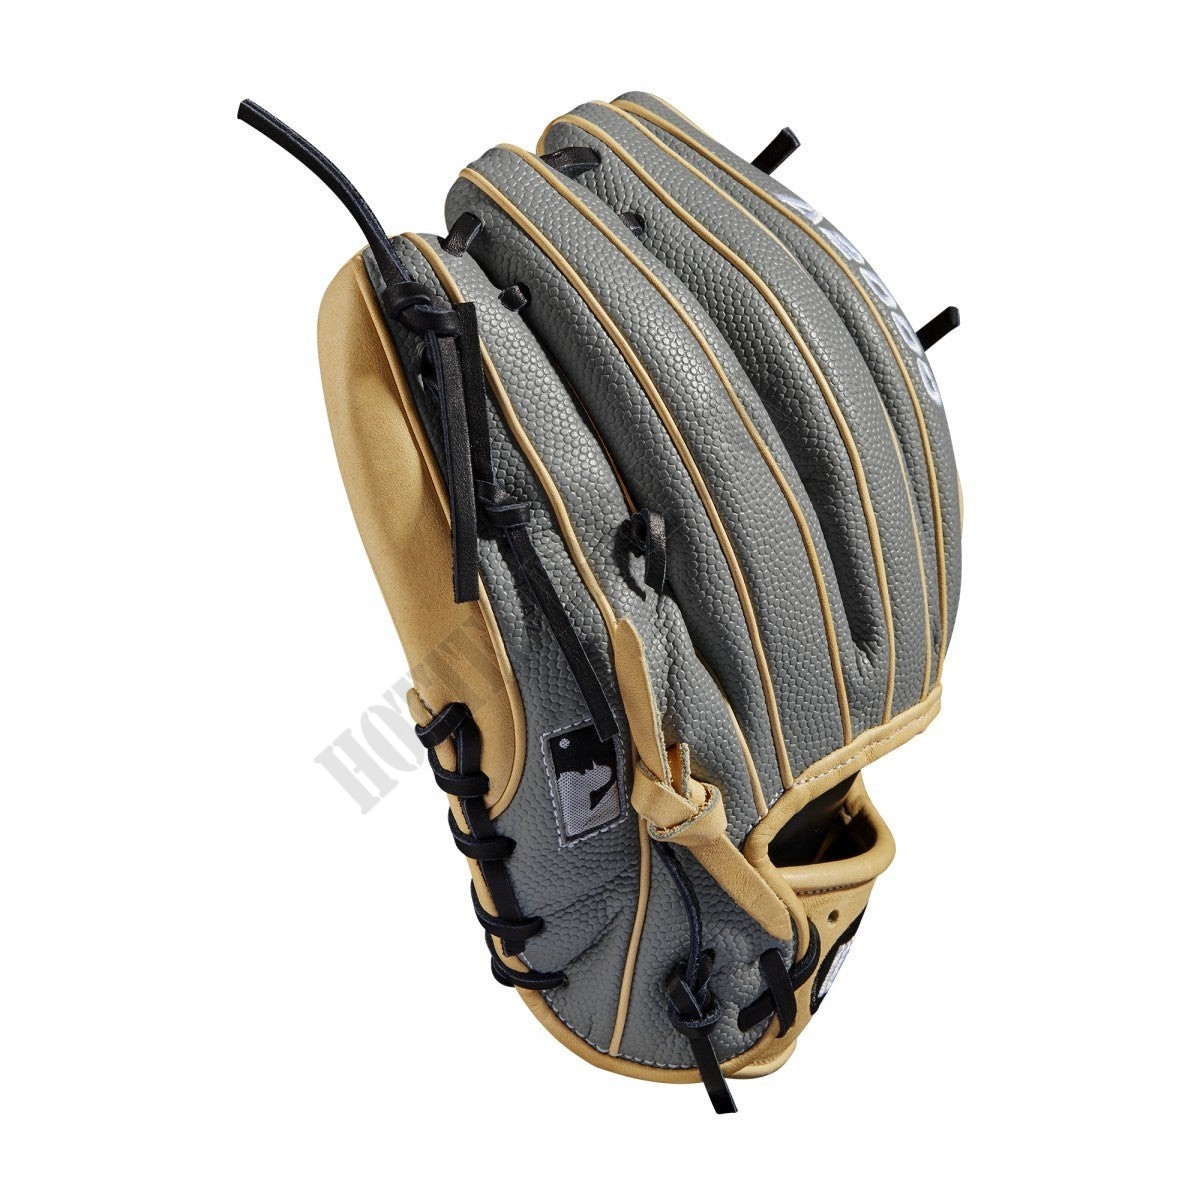 2019 A2000 1788 SuperSkin 11.25" Infield Baseball Glove - Right Hand Throw ● Wilson Promotions - -4